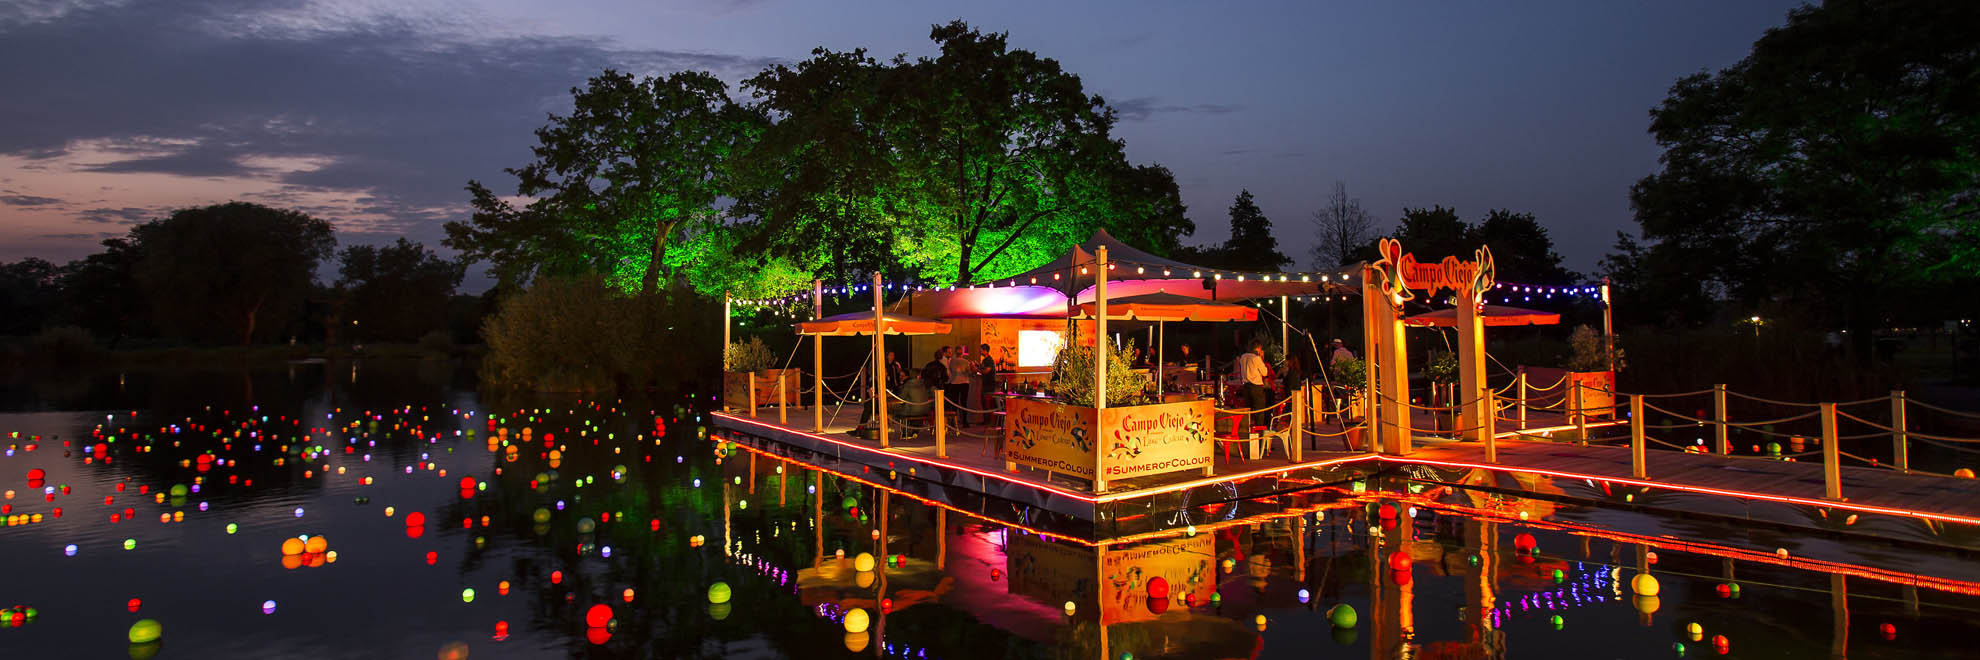 Floating bar on a lake with mulitcolour lights on the lake